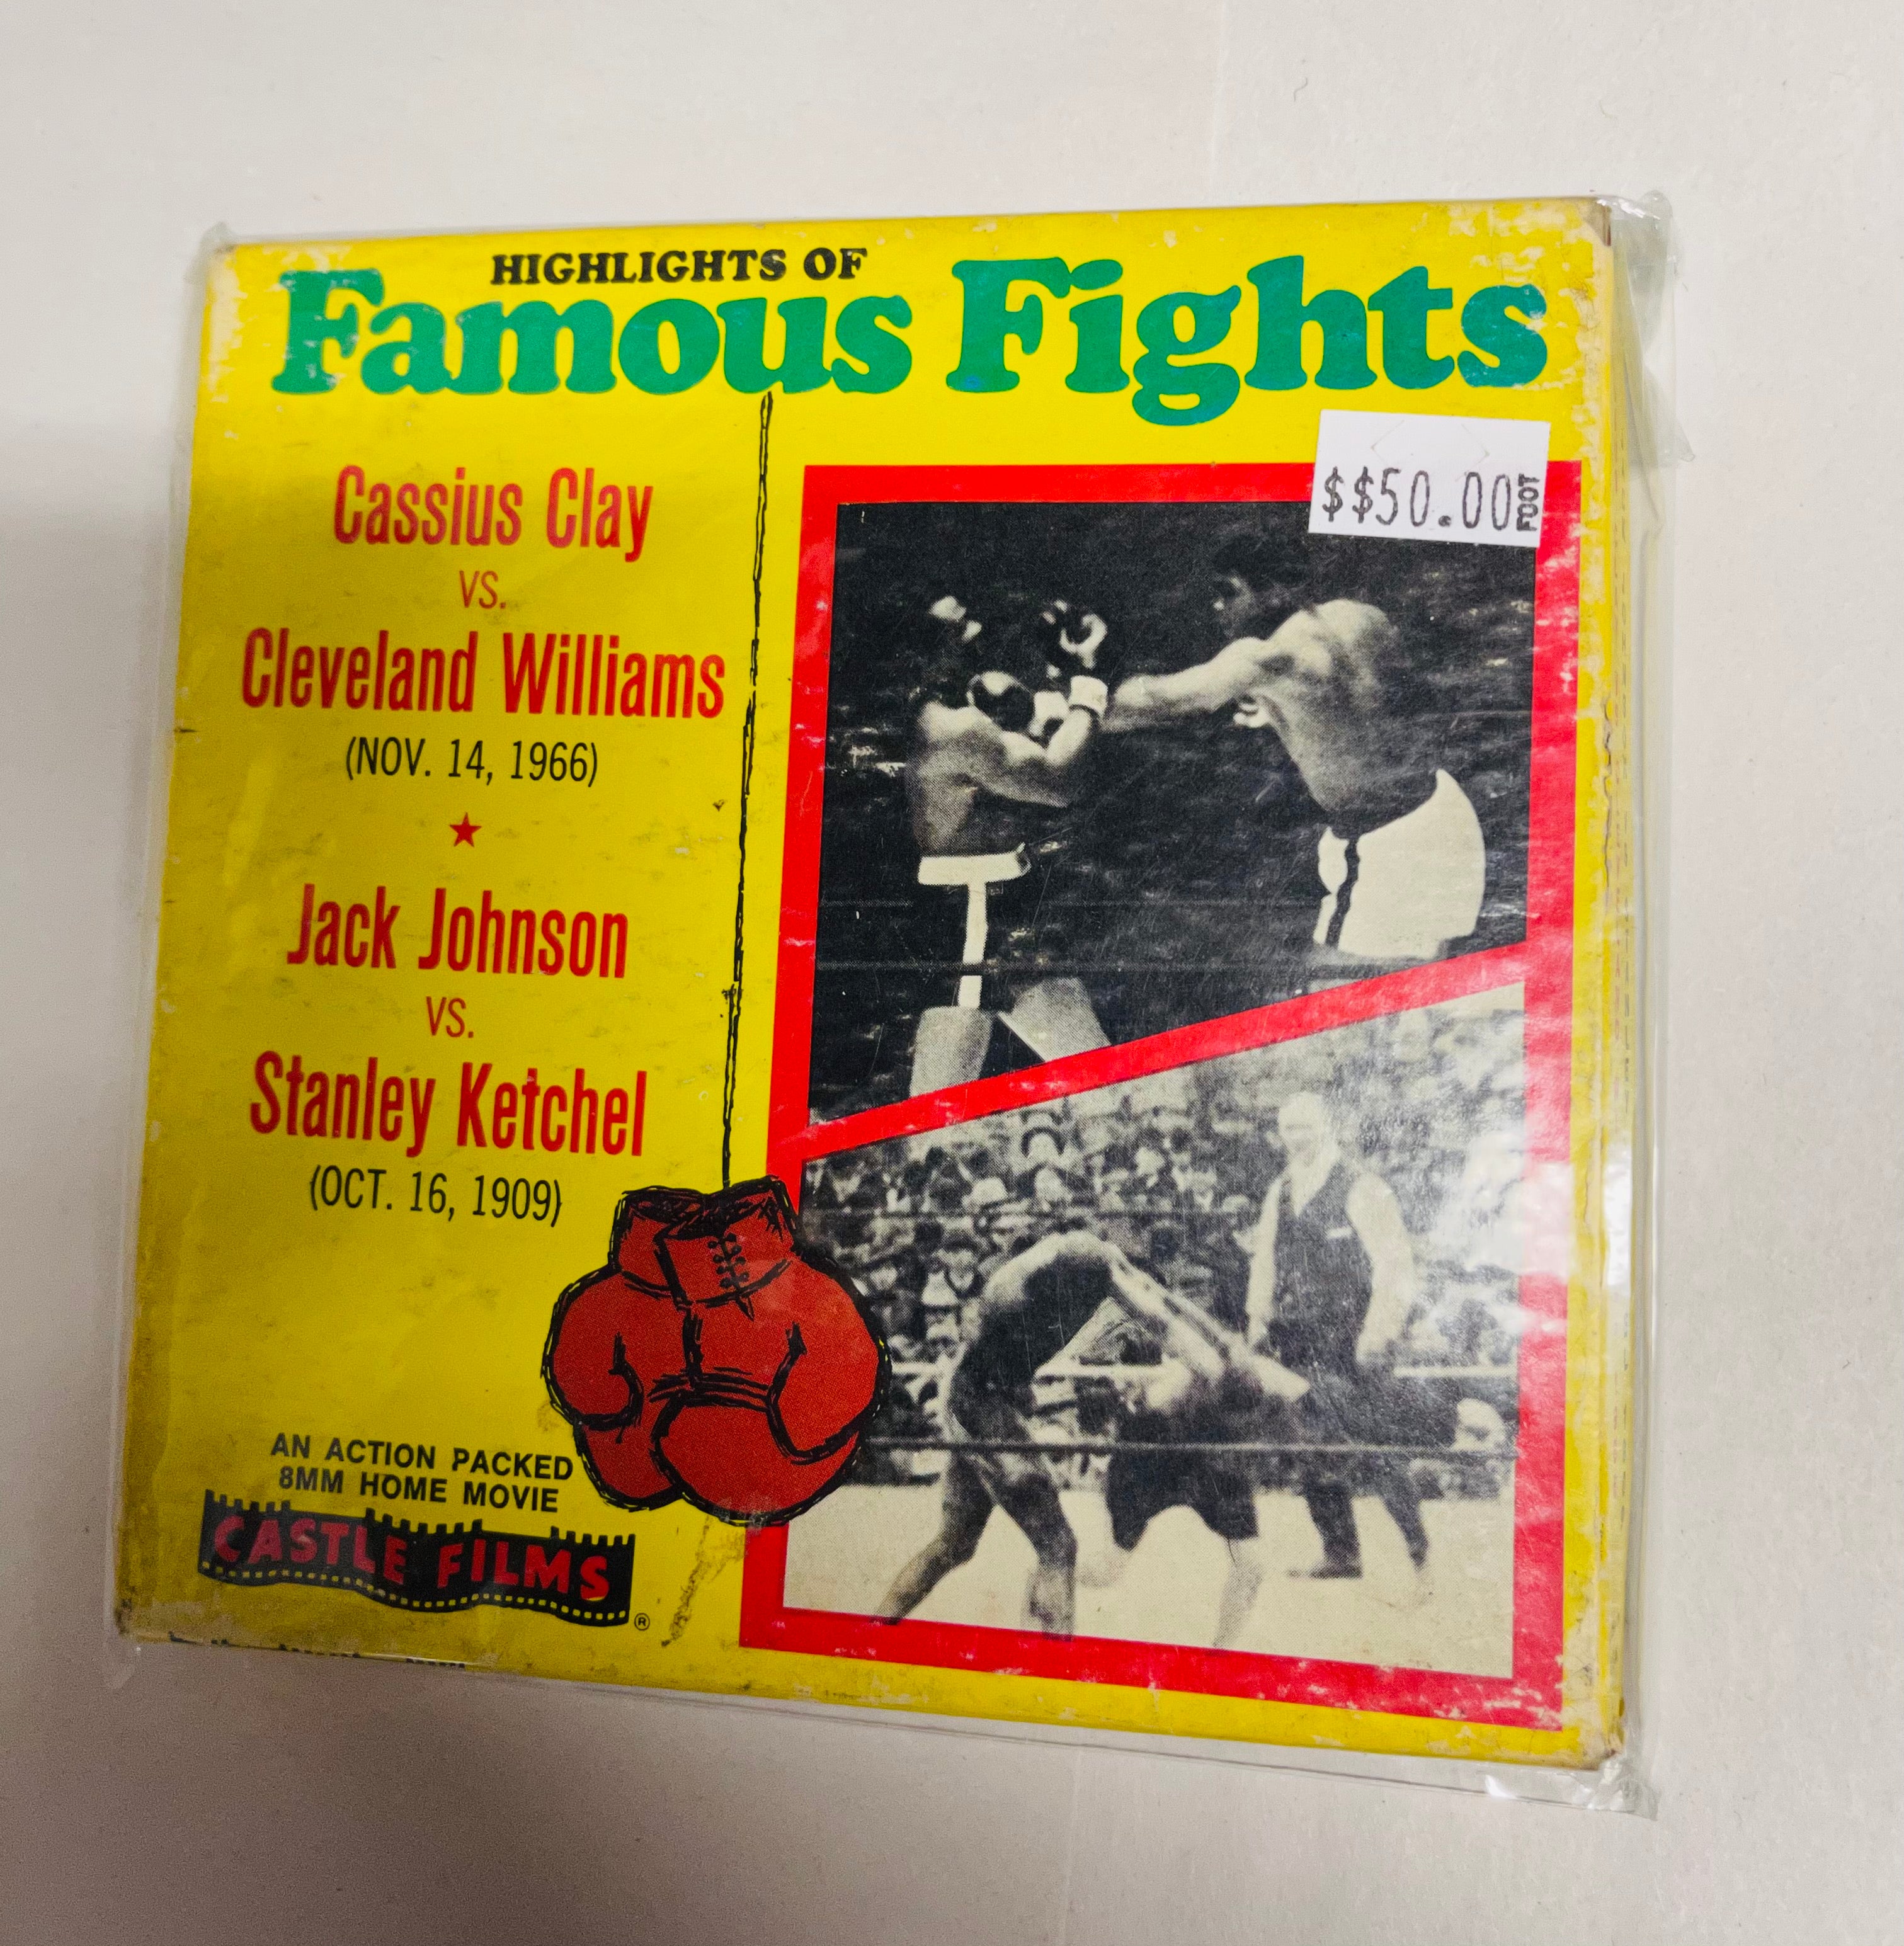 Muhammad Ali (Cassius Clay famous boxing fights on super eight film reel 1970s